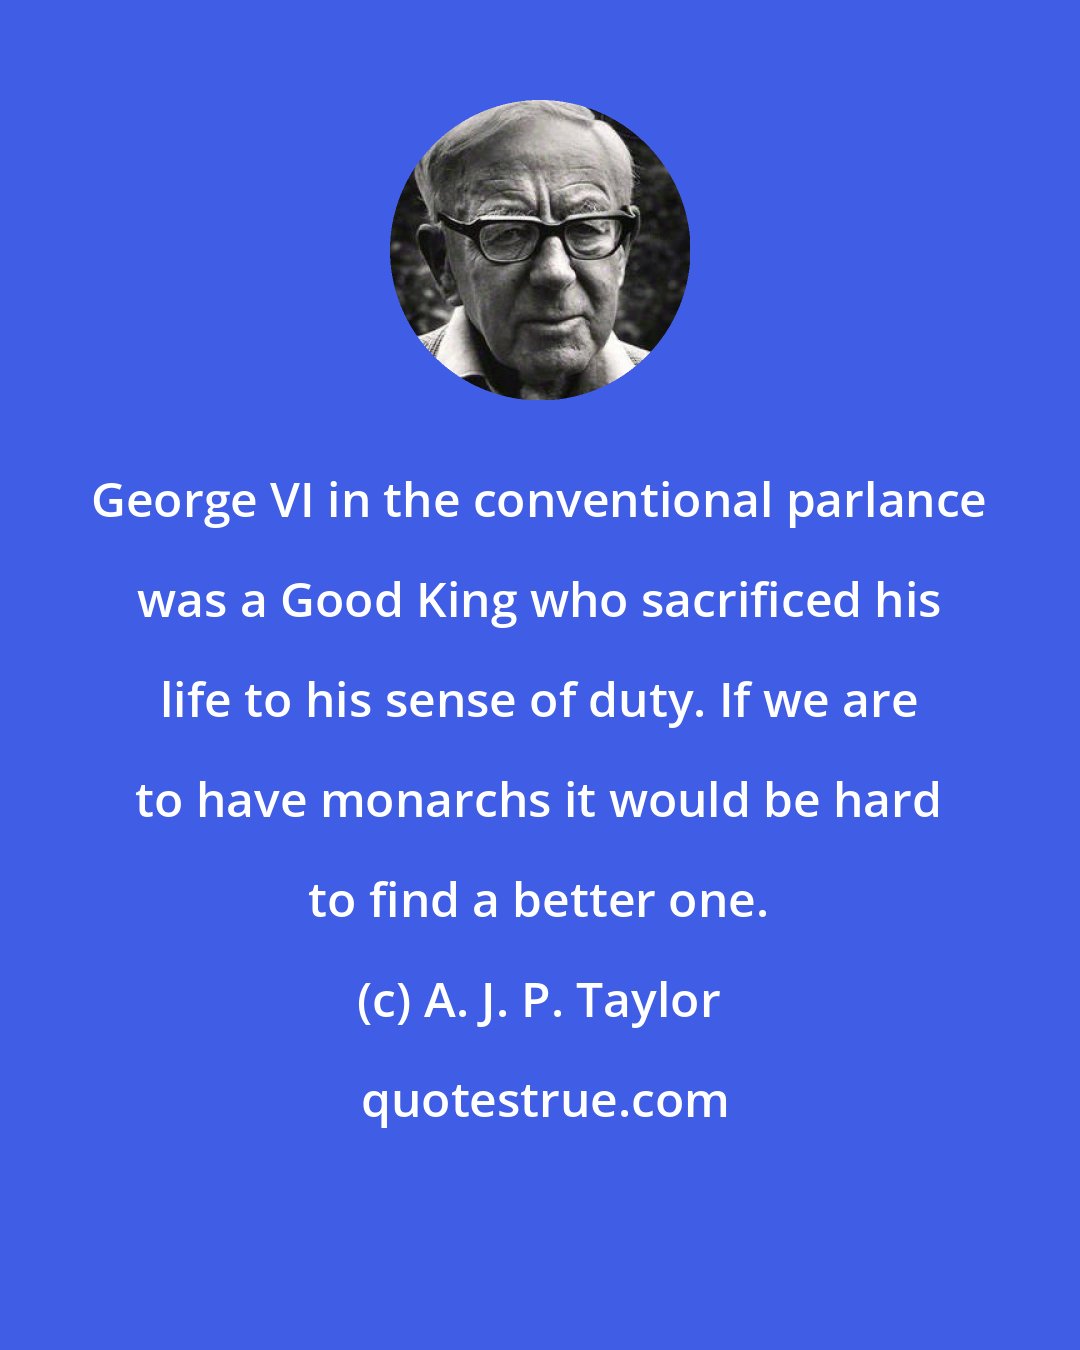 A. J. P. Taylor: George VI in the conventional parlance was a Good King who sacrificed his life to his sense of duty. If we are to have monarchs it would be hard to find a better one.